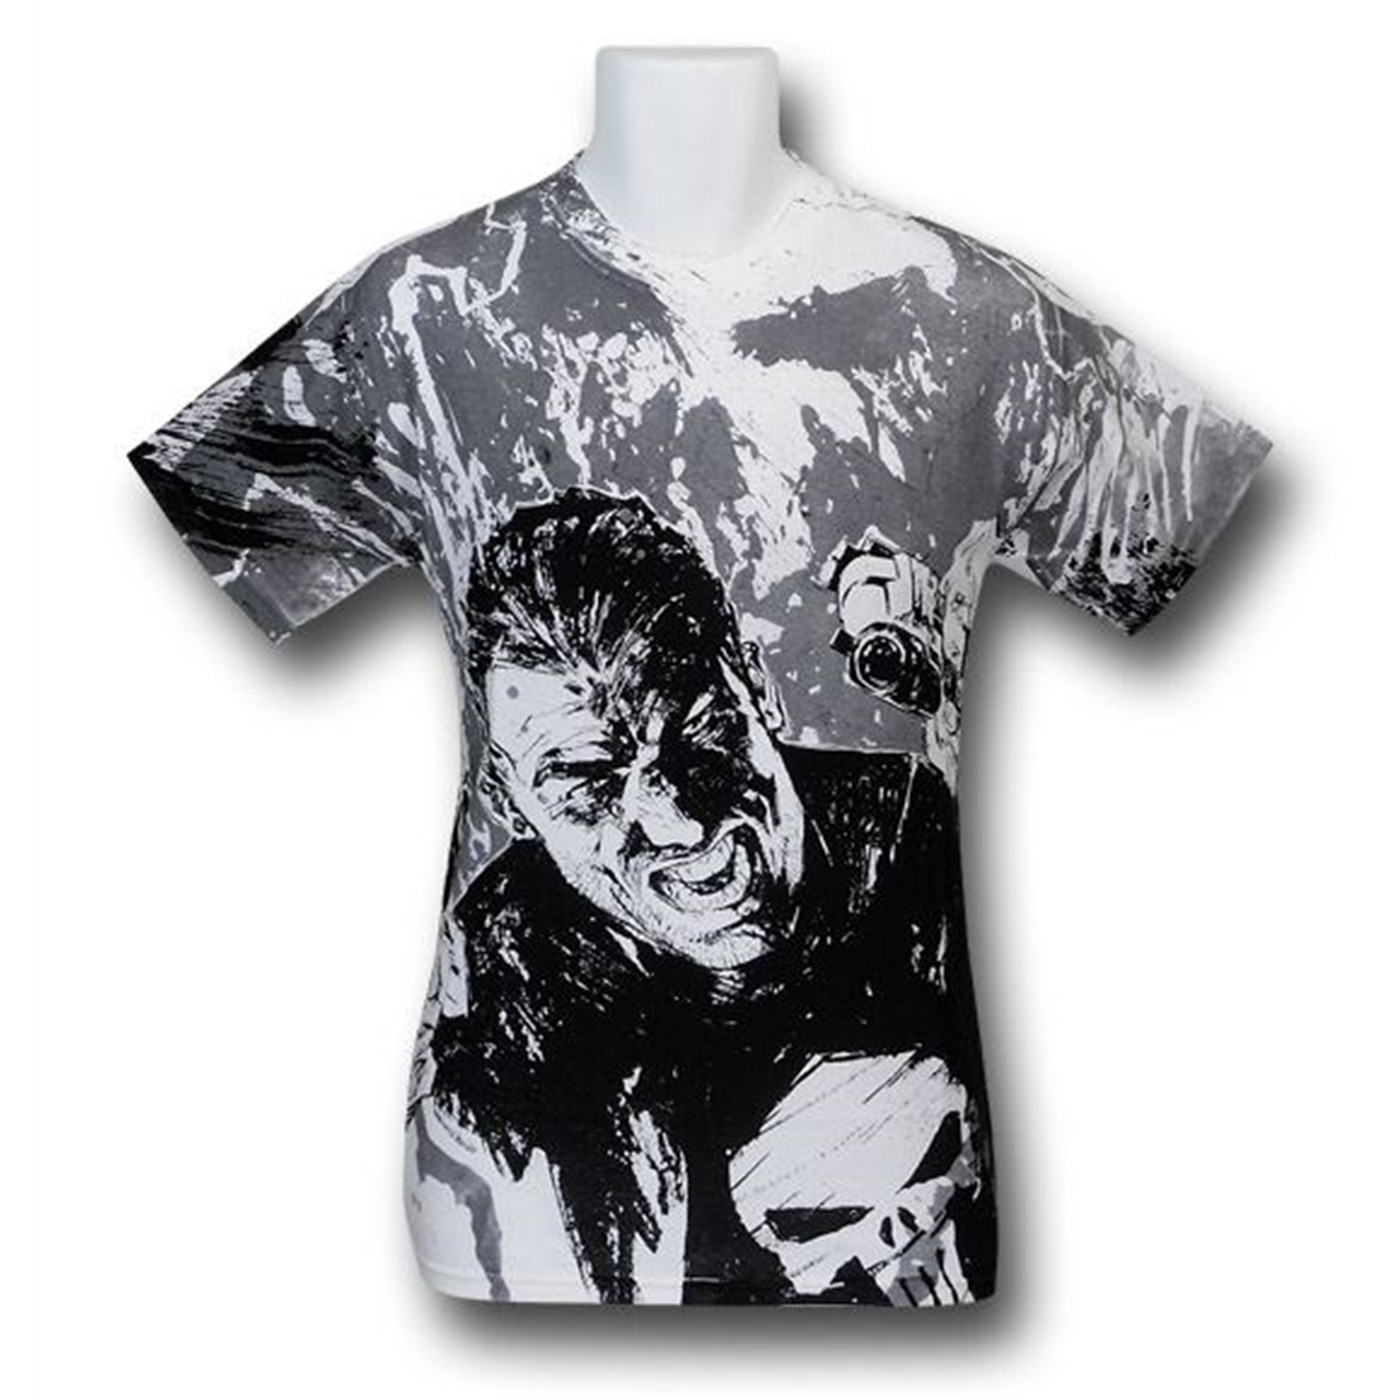 Punisher All Over Print Sublimated T-Shirt